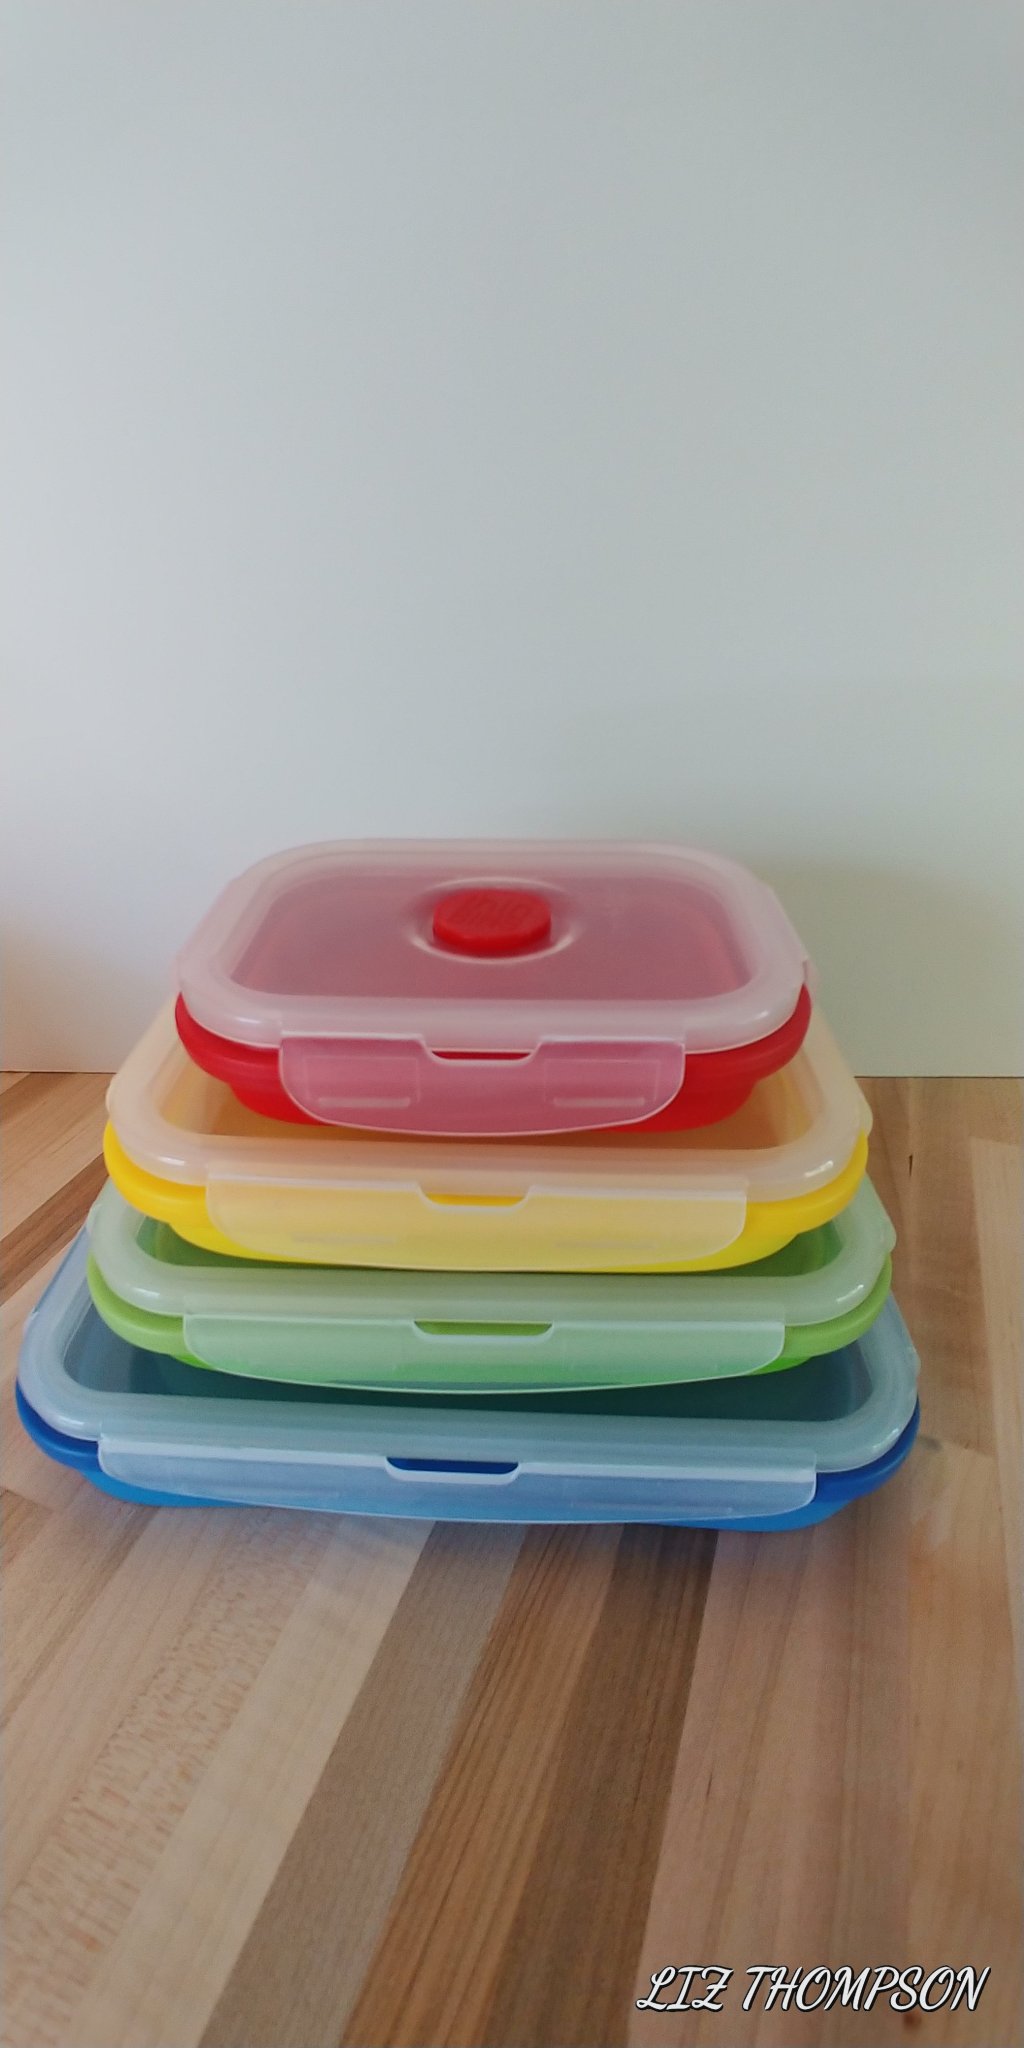 Thin Bins Collapsible Containers Set of 4 Rectangle Silicone Food Storage Containers BPA Free, Microwave, Dishwasher Safe